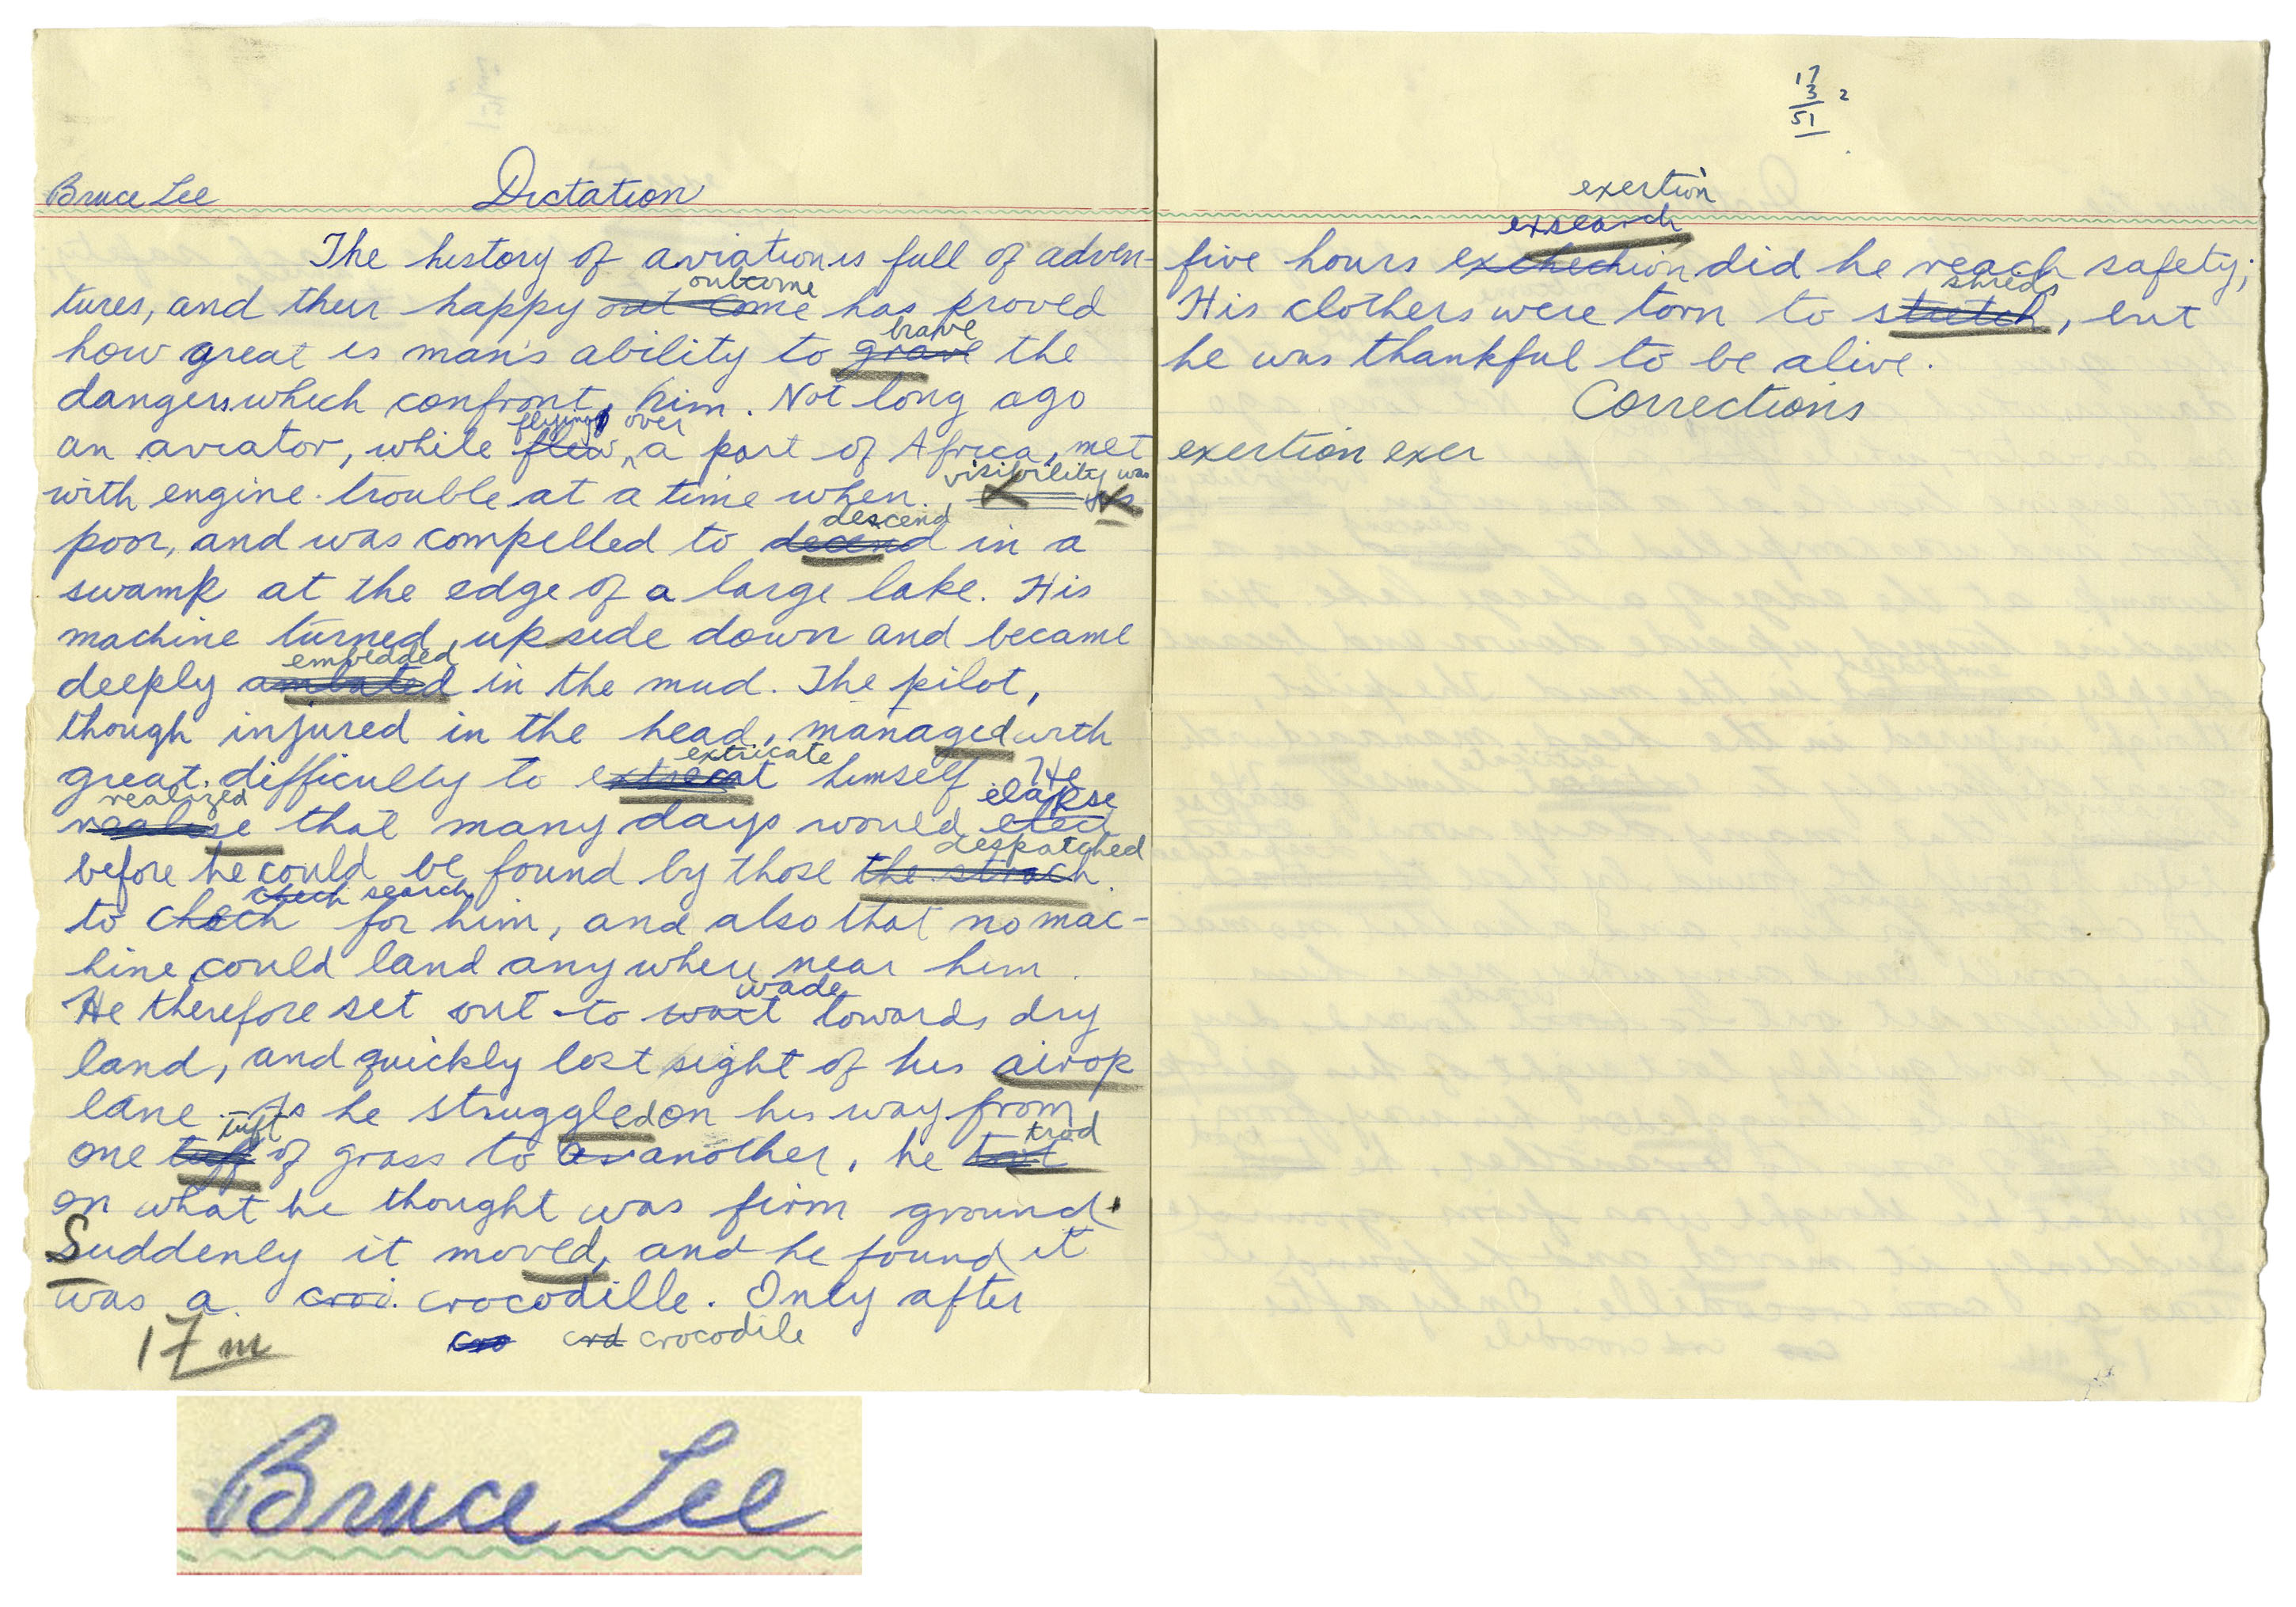 Bruce Lee Autograph Bruce Lee Personally Owned Signed & Handwritten Essay From High School -- ''...how great is man's ability to brave the dangers which confront him...'' -- Among Earliest Examples of Lee's Writing